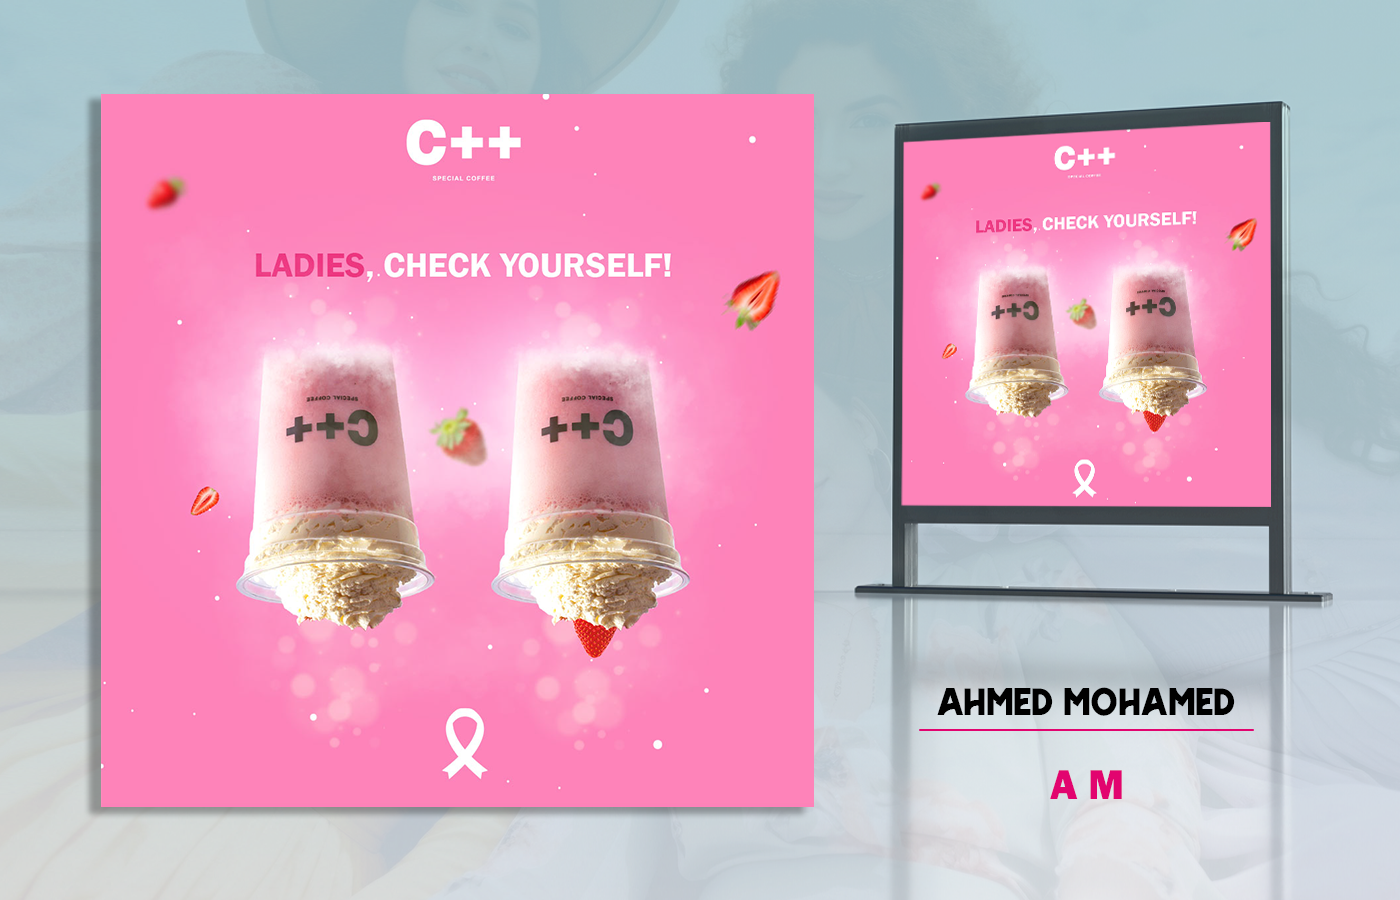 cancer Social media post awerness Advertising  Graphic Designer Socialmedia post breast cancer pink october woman